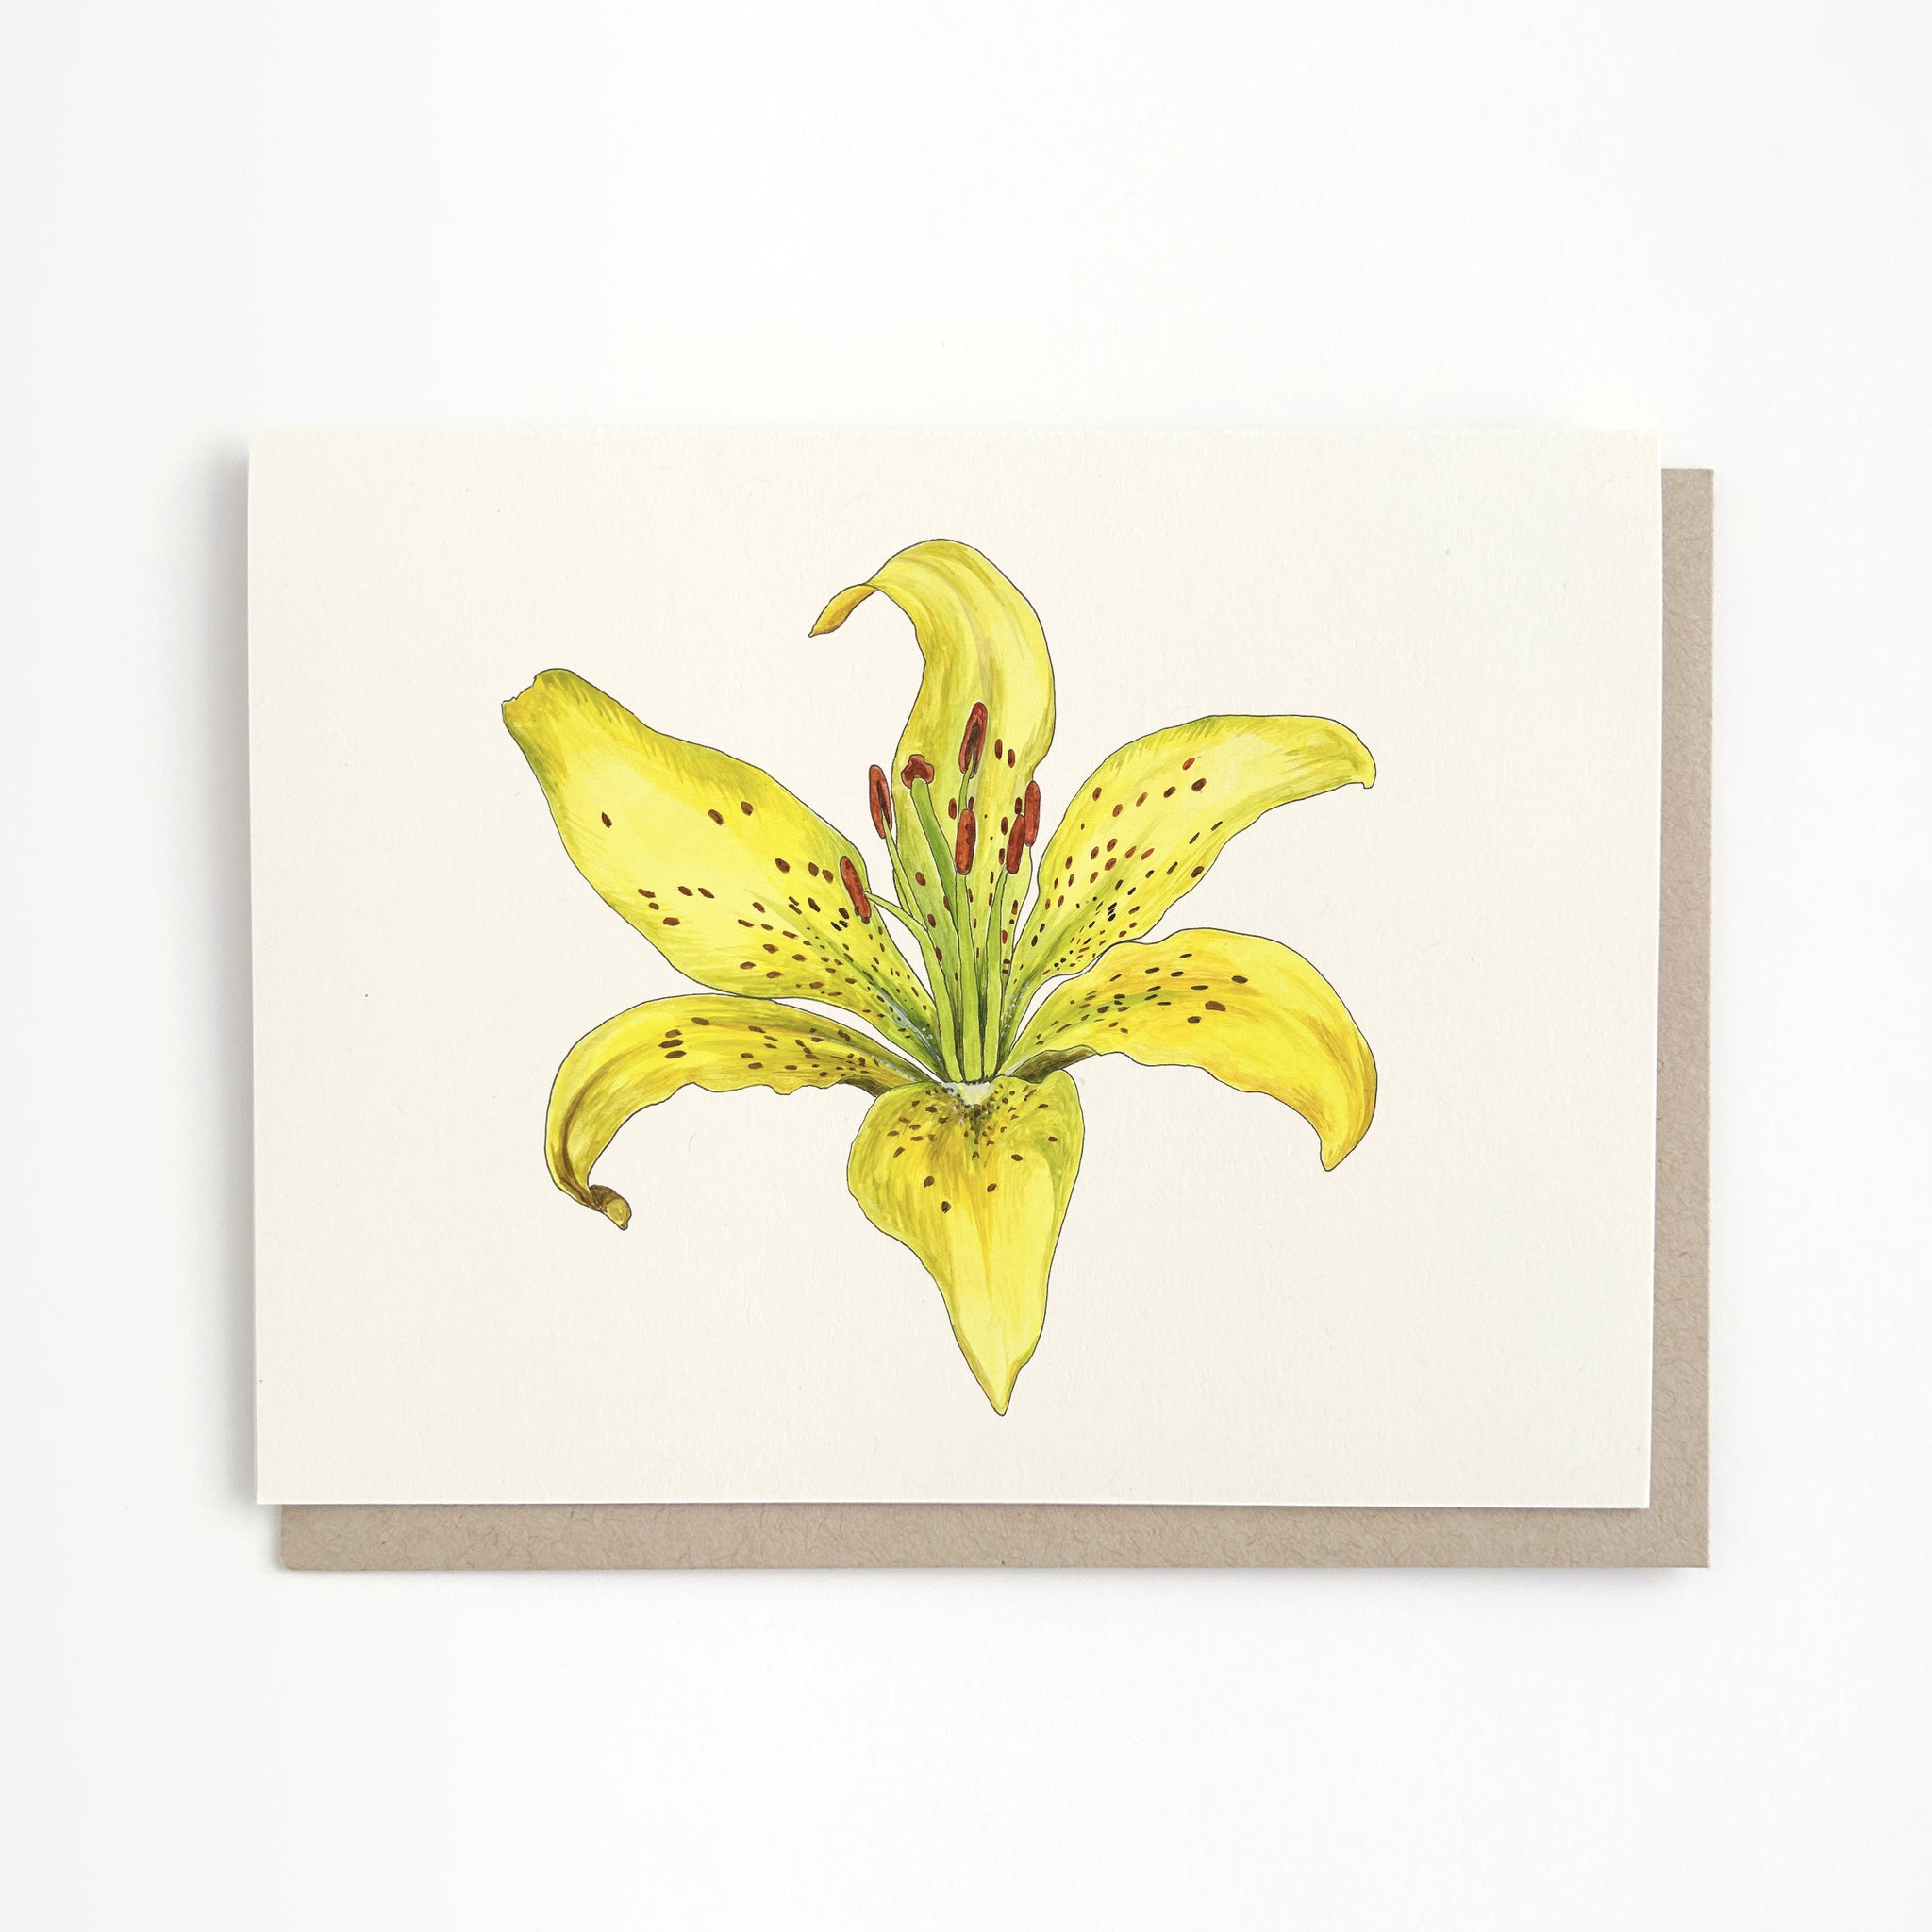 Tiger Lily Card